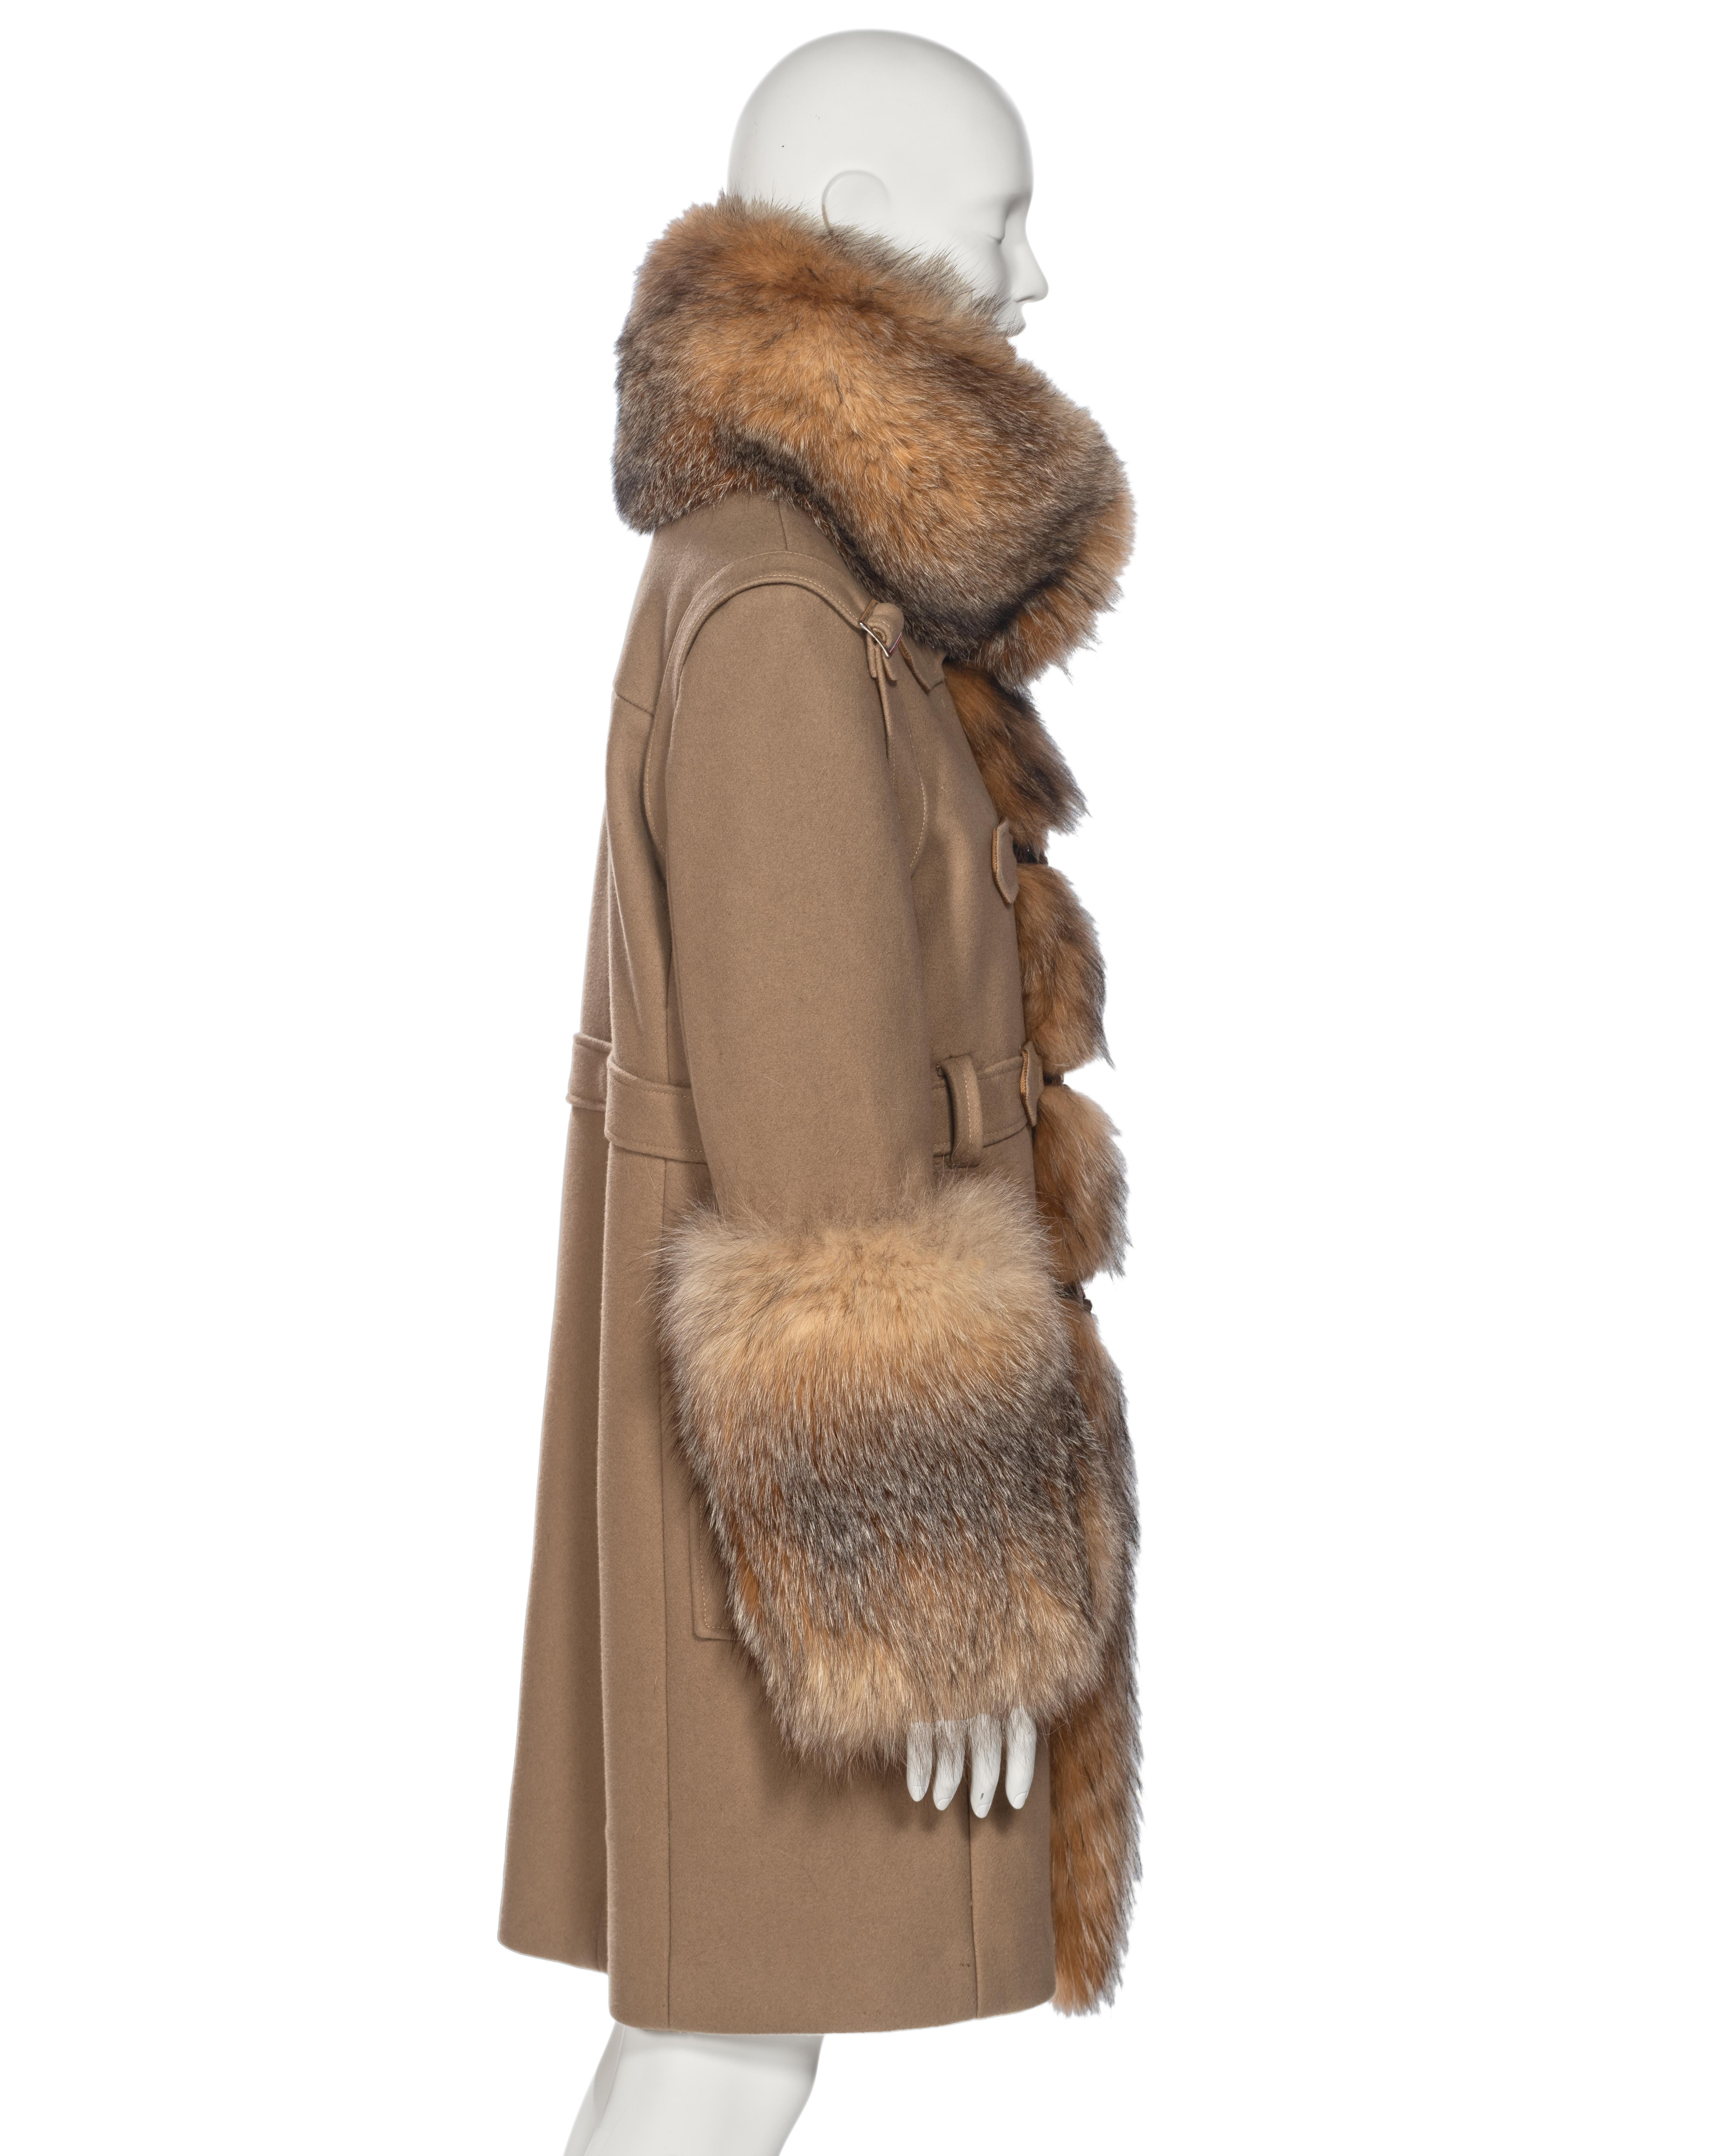 Balenciaga by Nicolas Ghesquière Fur-Trimmed Felted Wool Duffle Coat, fw 2005 For Sale 8